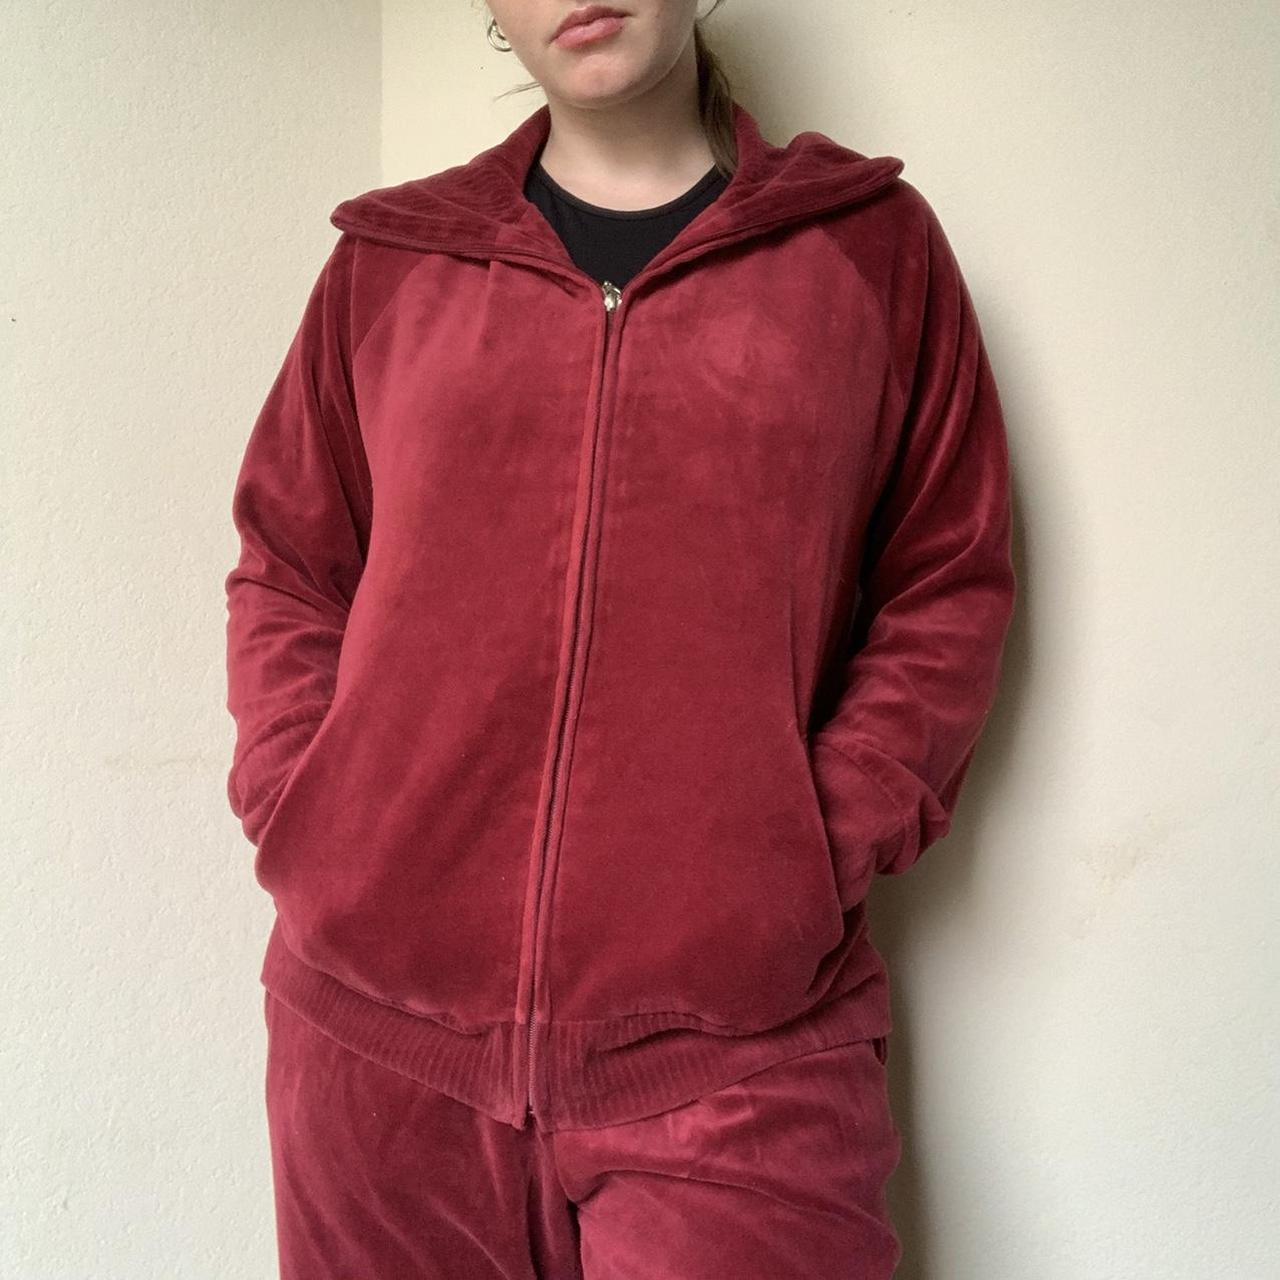 Vintage 90s Norm Thompson Comfort Collection Red... - Depop